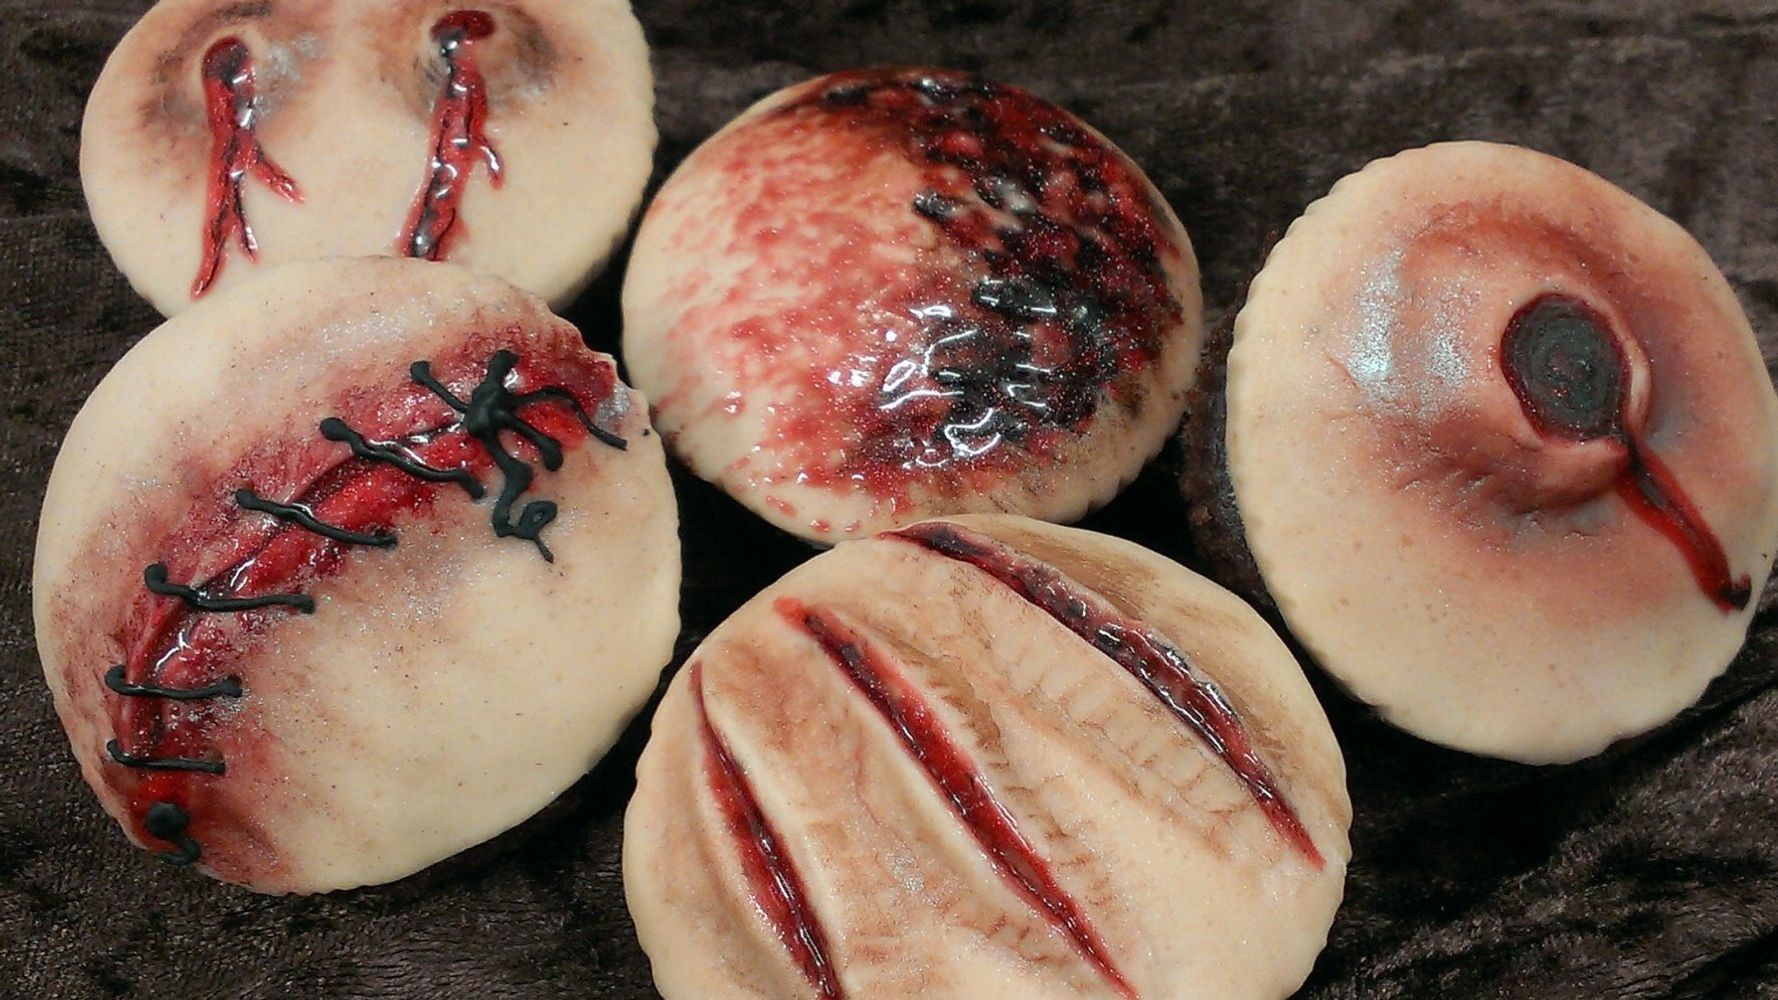 These Halloween Cakes Are As Disgusting, Gross And Scary As They Should